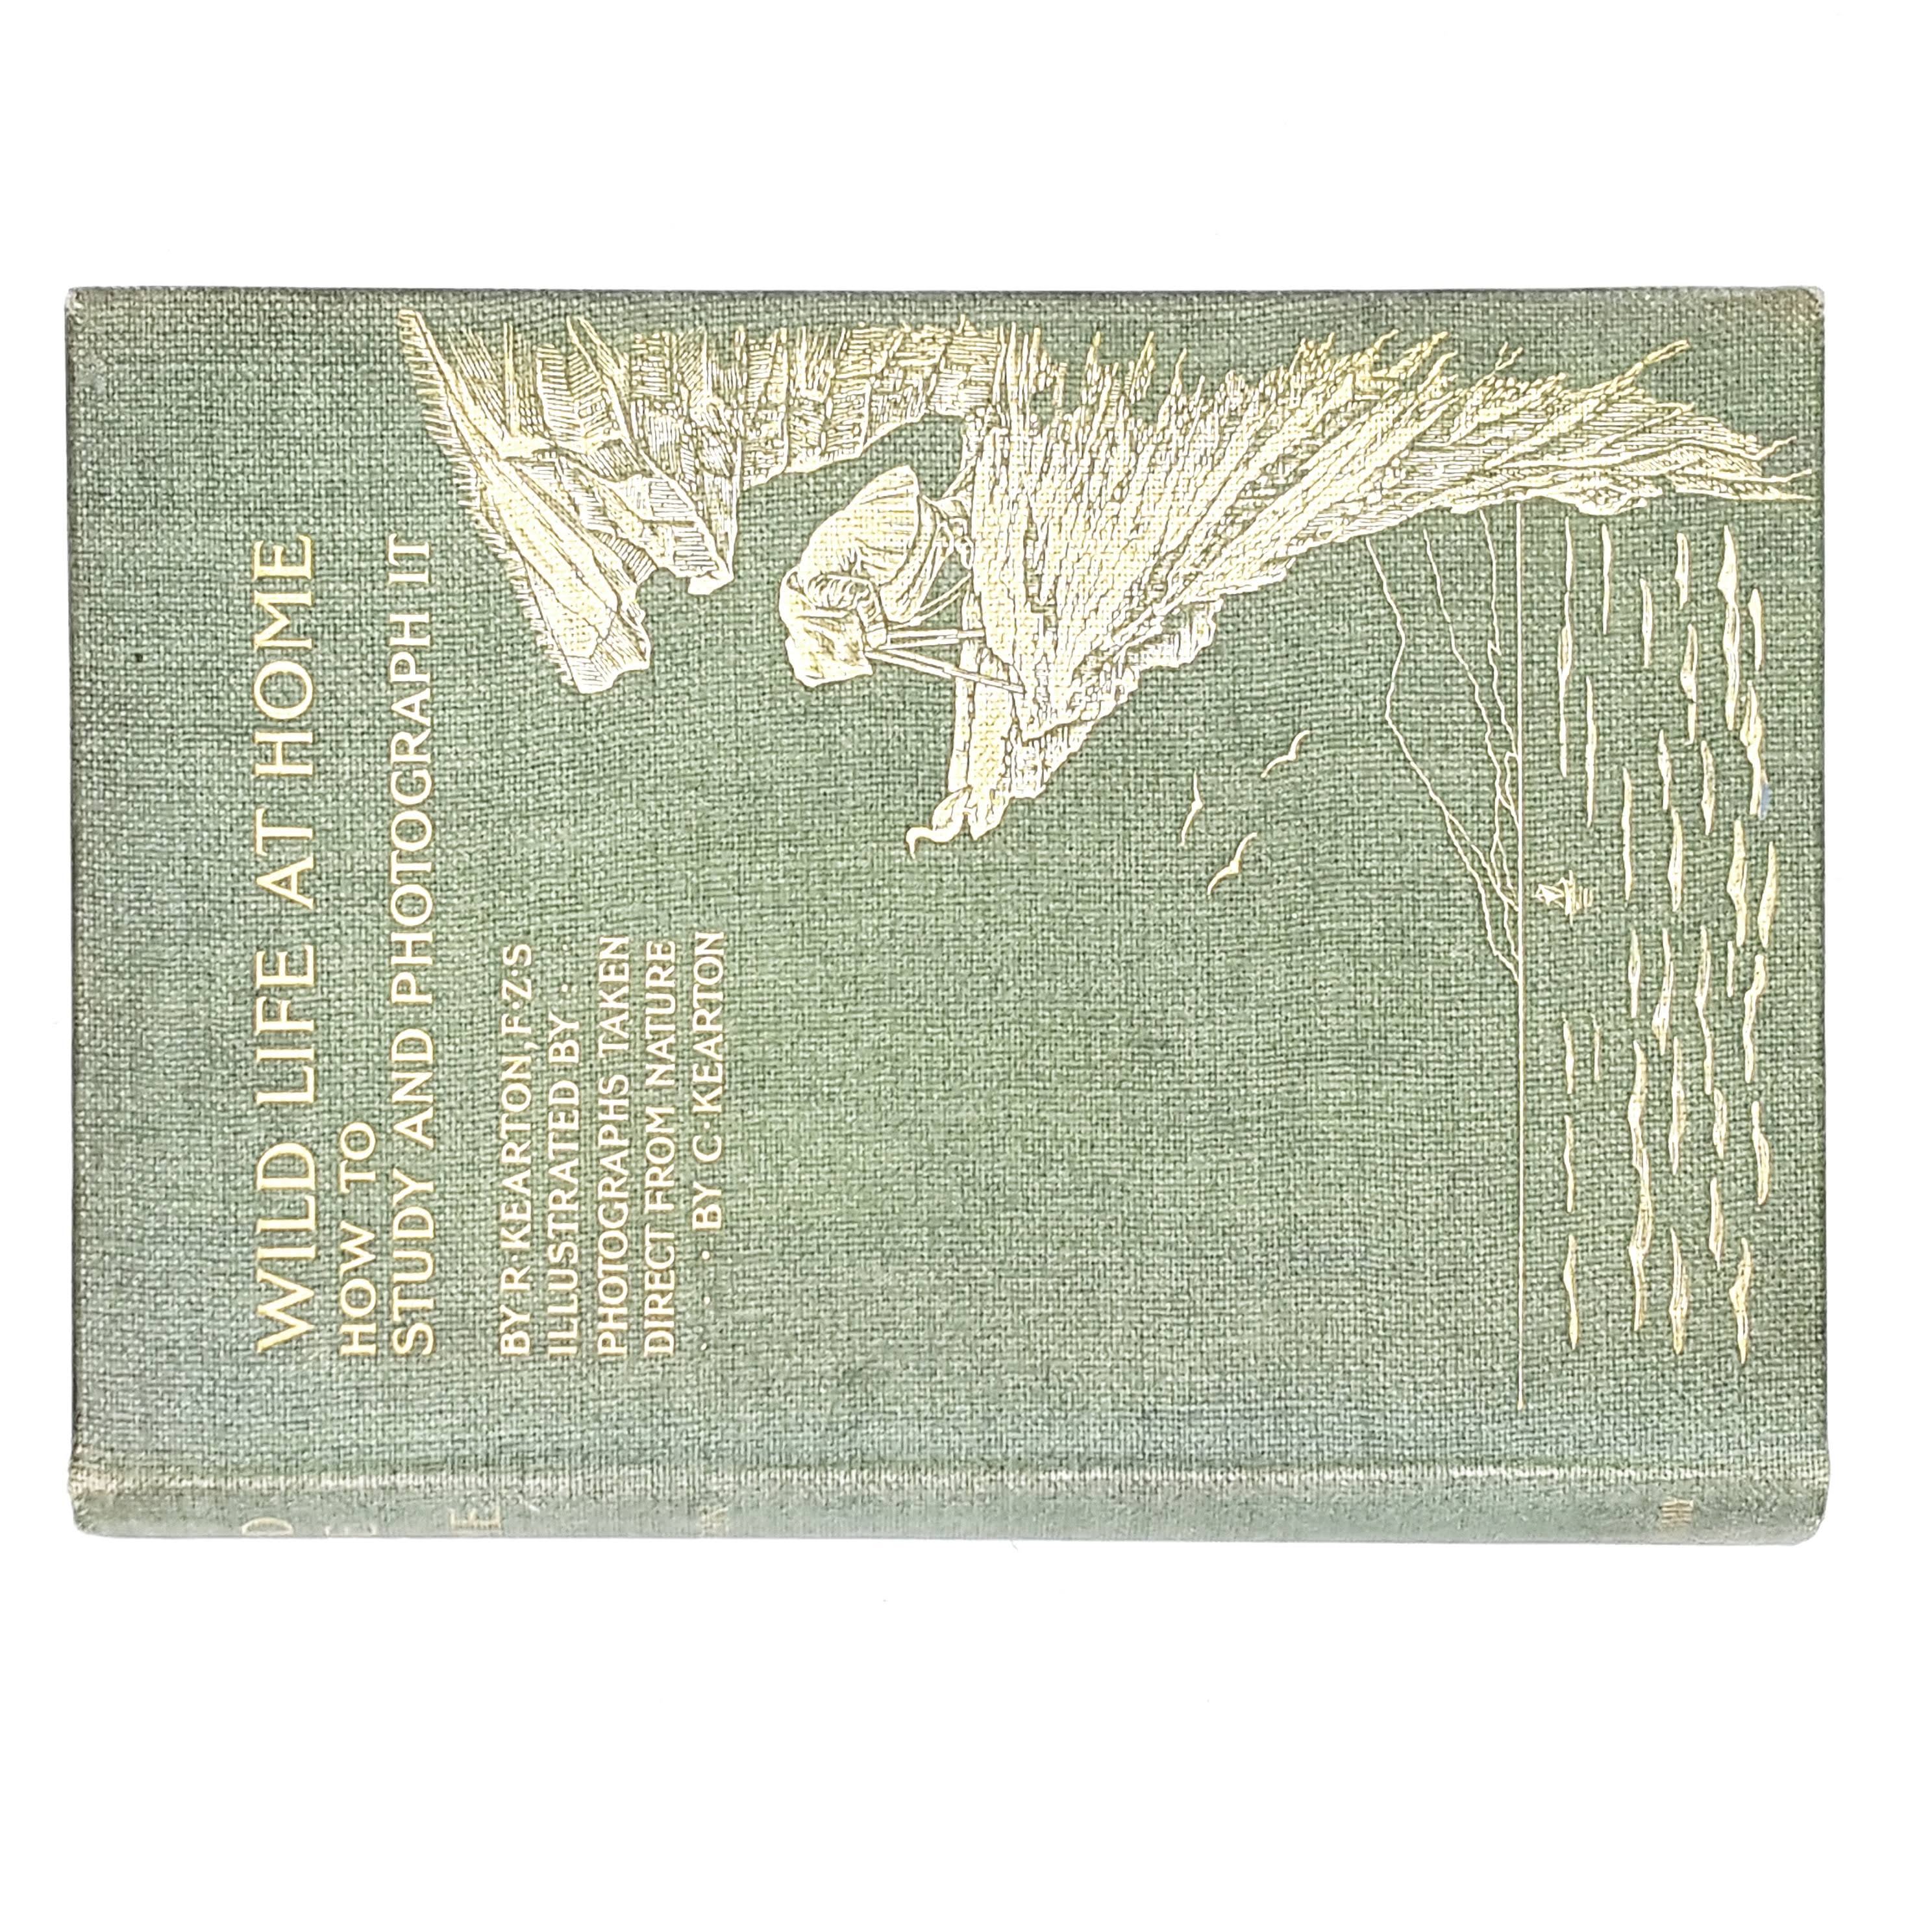 WILD LIFE AT HOME HOW TO STUDY AND PHOTOGRAPH IT BY R. KEARTON 1904